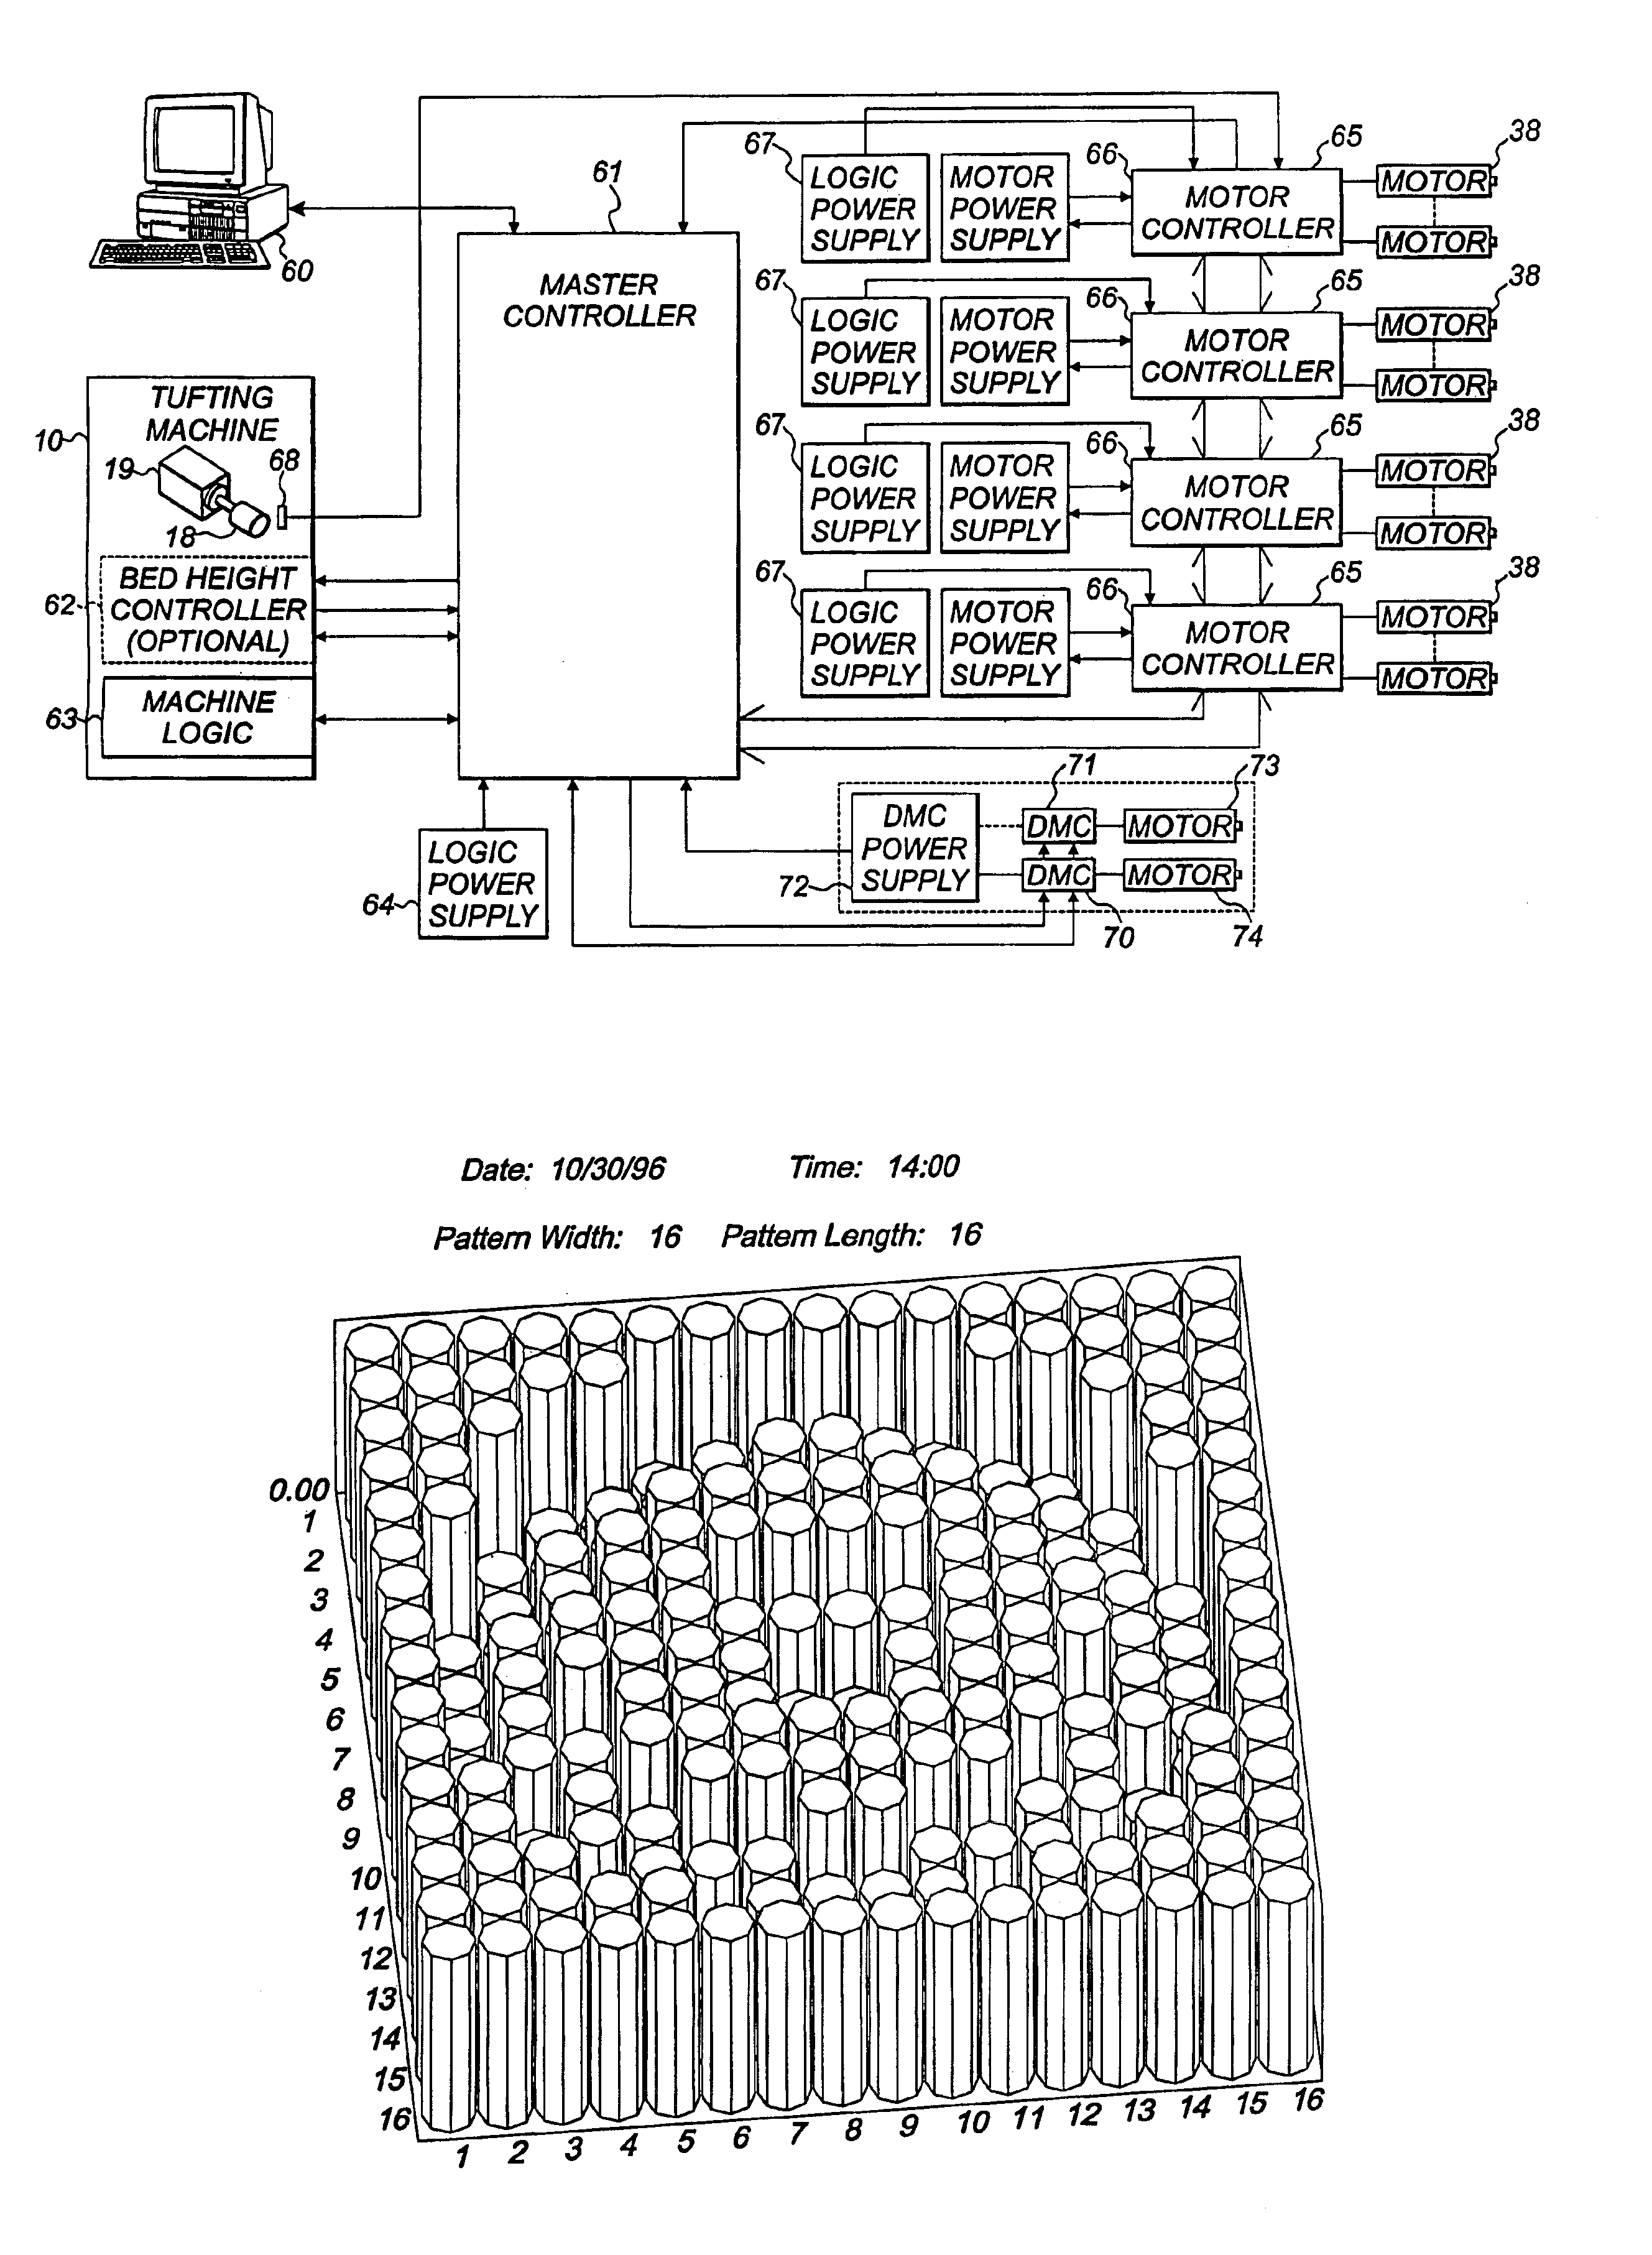 Servo motor driven scroll pattern attachments for tufting machine with computerized design system and methods of tufting